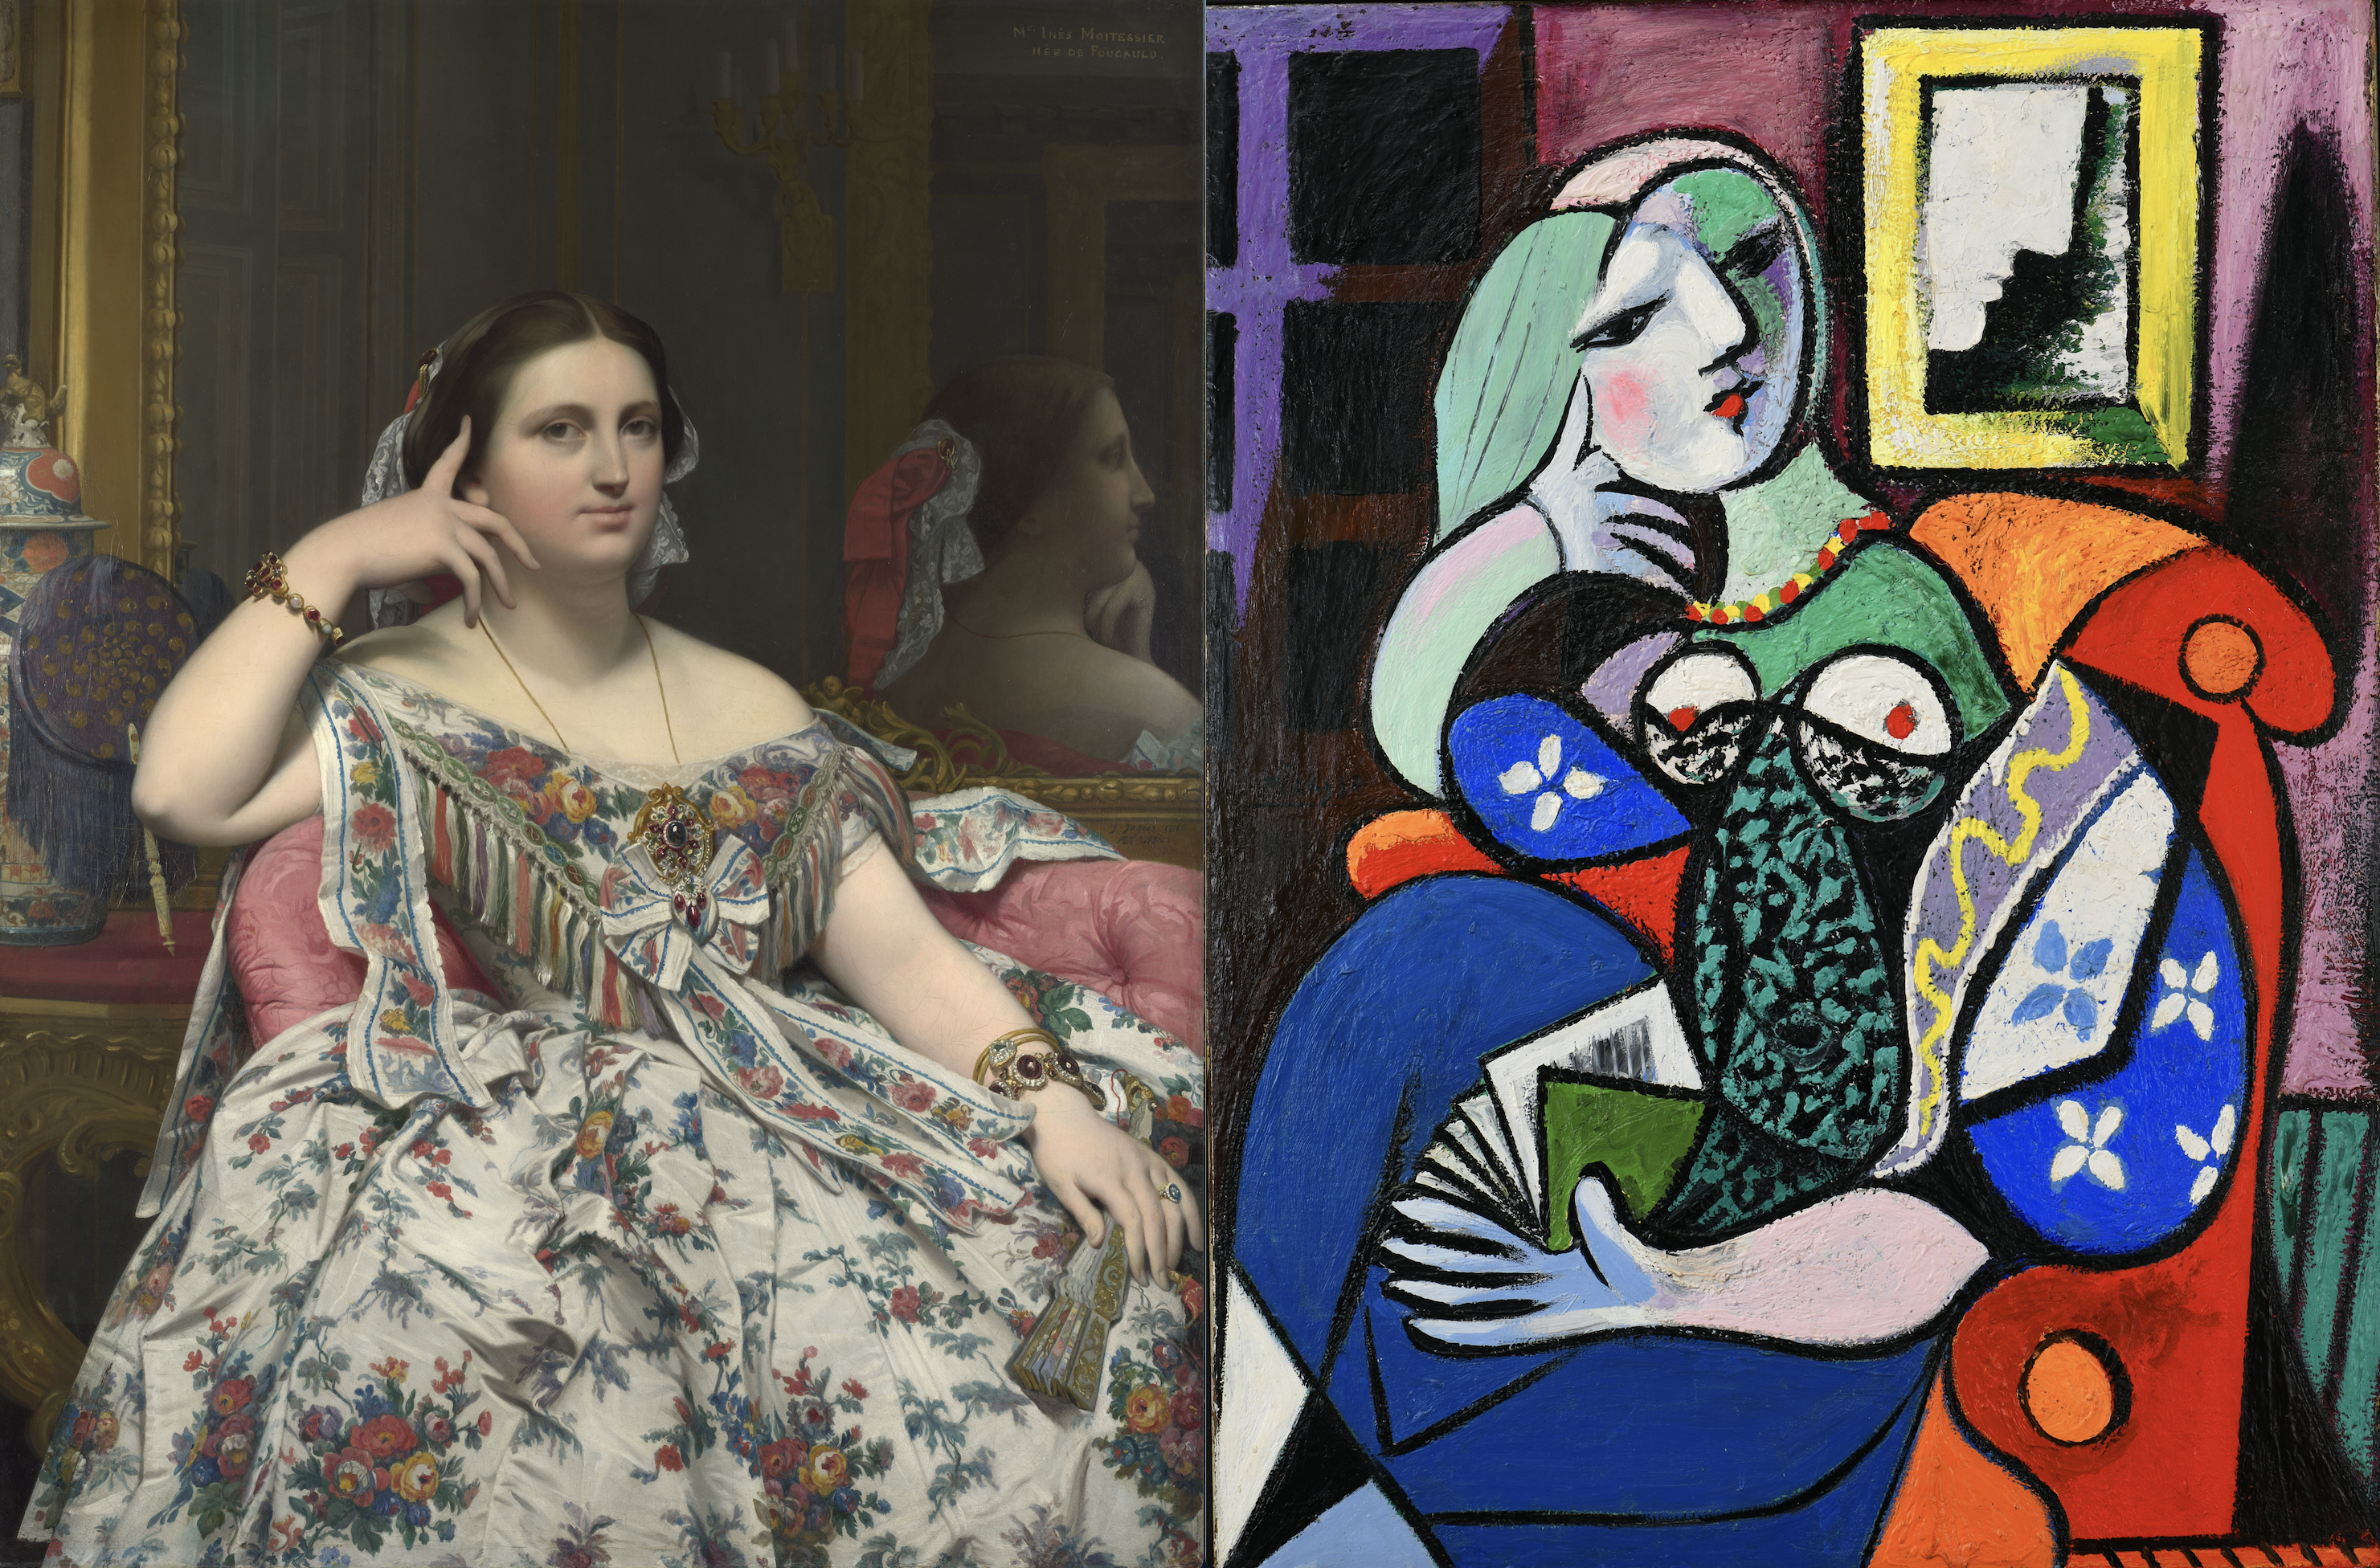 Left, Jean-Auguste-Dominique Ingres (French, 1780–1867), ‘Madame Moitessier,’ 1856. Oil on canvas, 120 by 92.1cm. © The National Gallery, London; Right, Pablo Picasso (Spanish, 1881–1973), ‘Woman with a Book,’ 1932. Oil on canvas, 51 3/8 by 38 1/2in. (130.5 by 97.8cm). The Norton Simon Foundation. © 2022 Estate of Pablo Picasso / Artists Rights Society (ARS), New York 